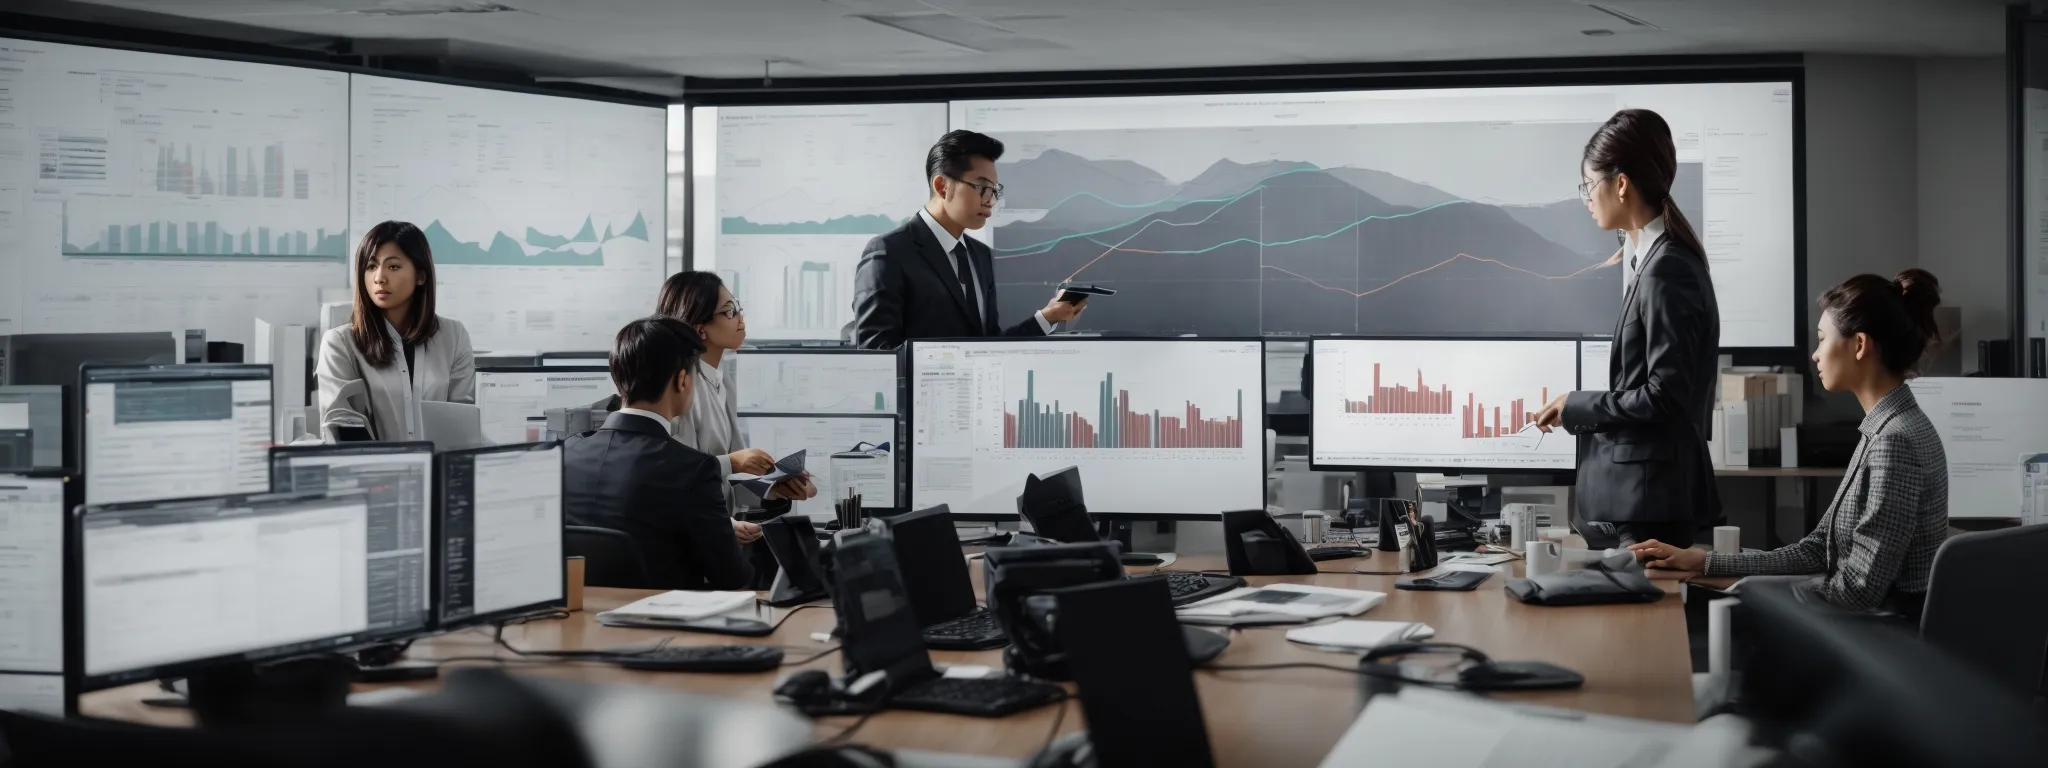 a marketing team studies a graph on a large monitor in a sleek, modern office.